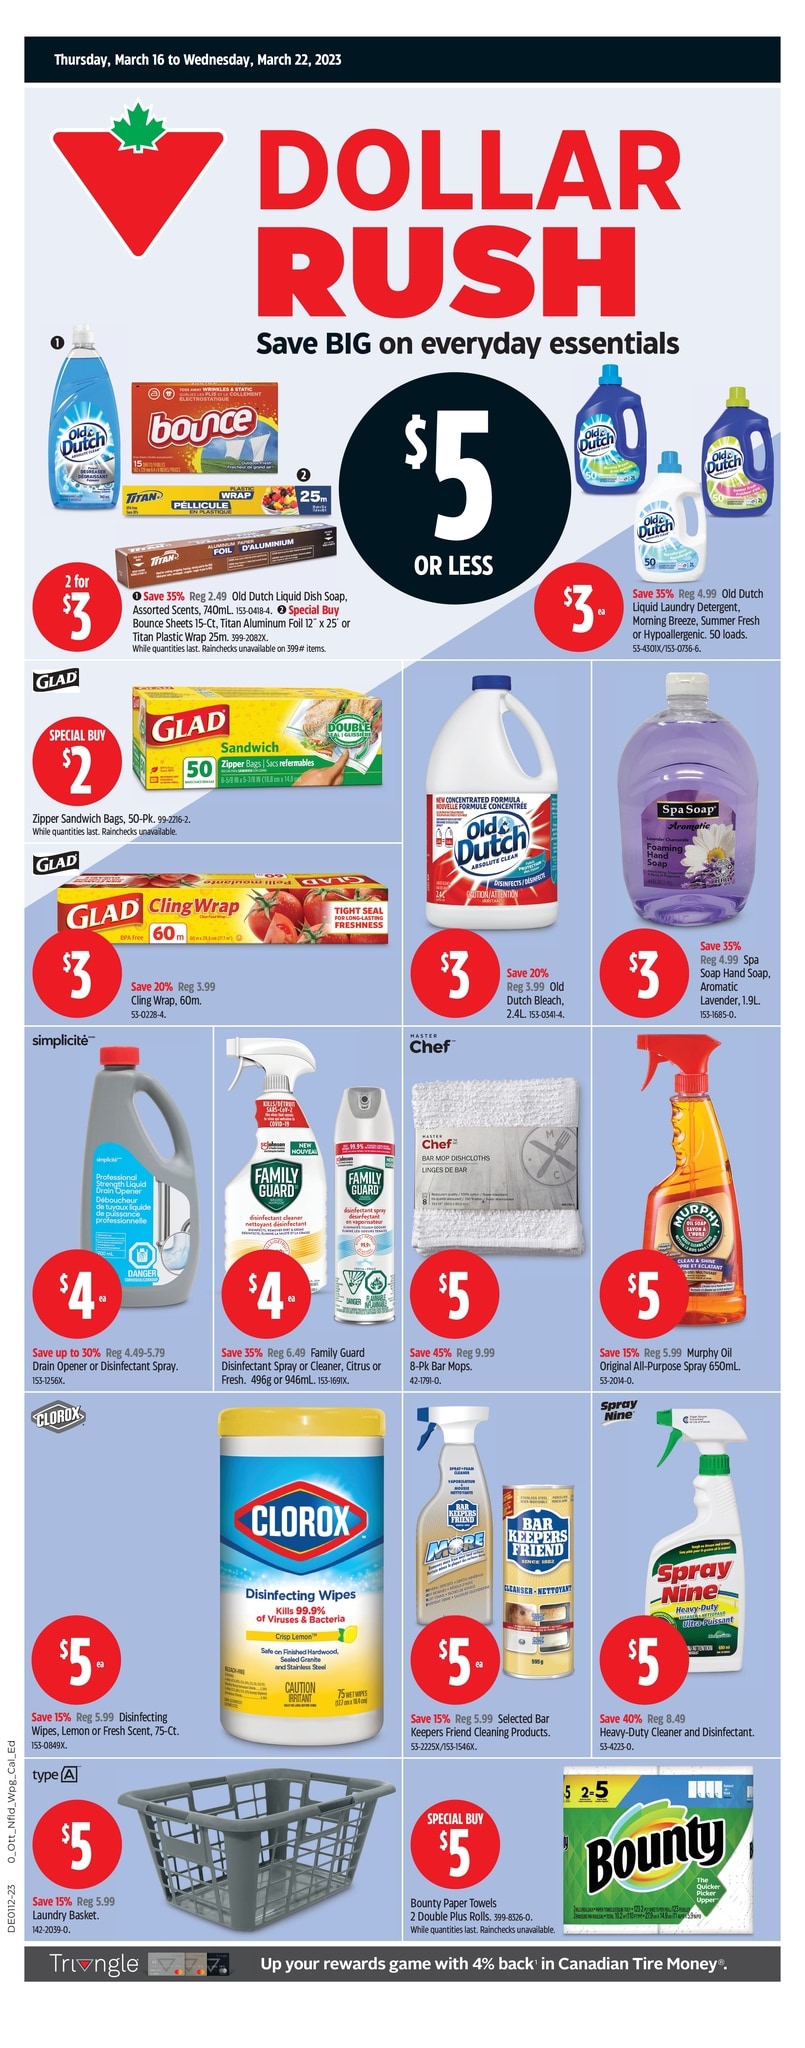 Canadian Tire - Weekly Flyer Specials - Page 2